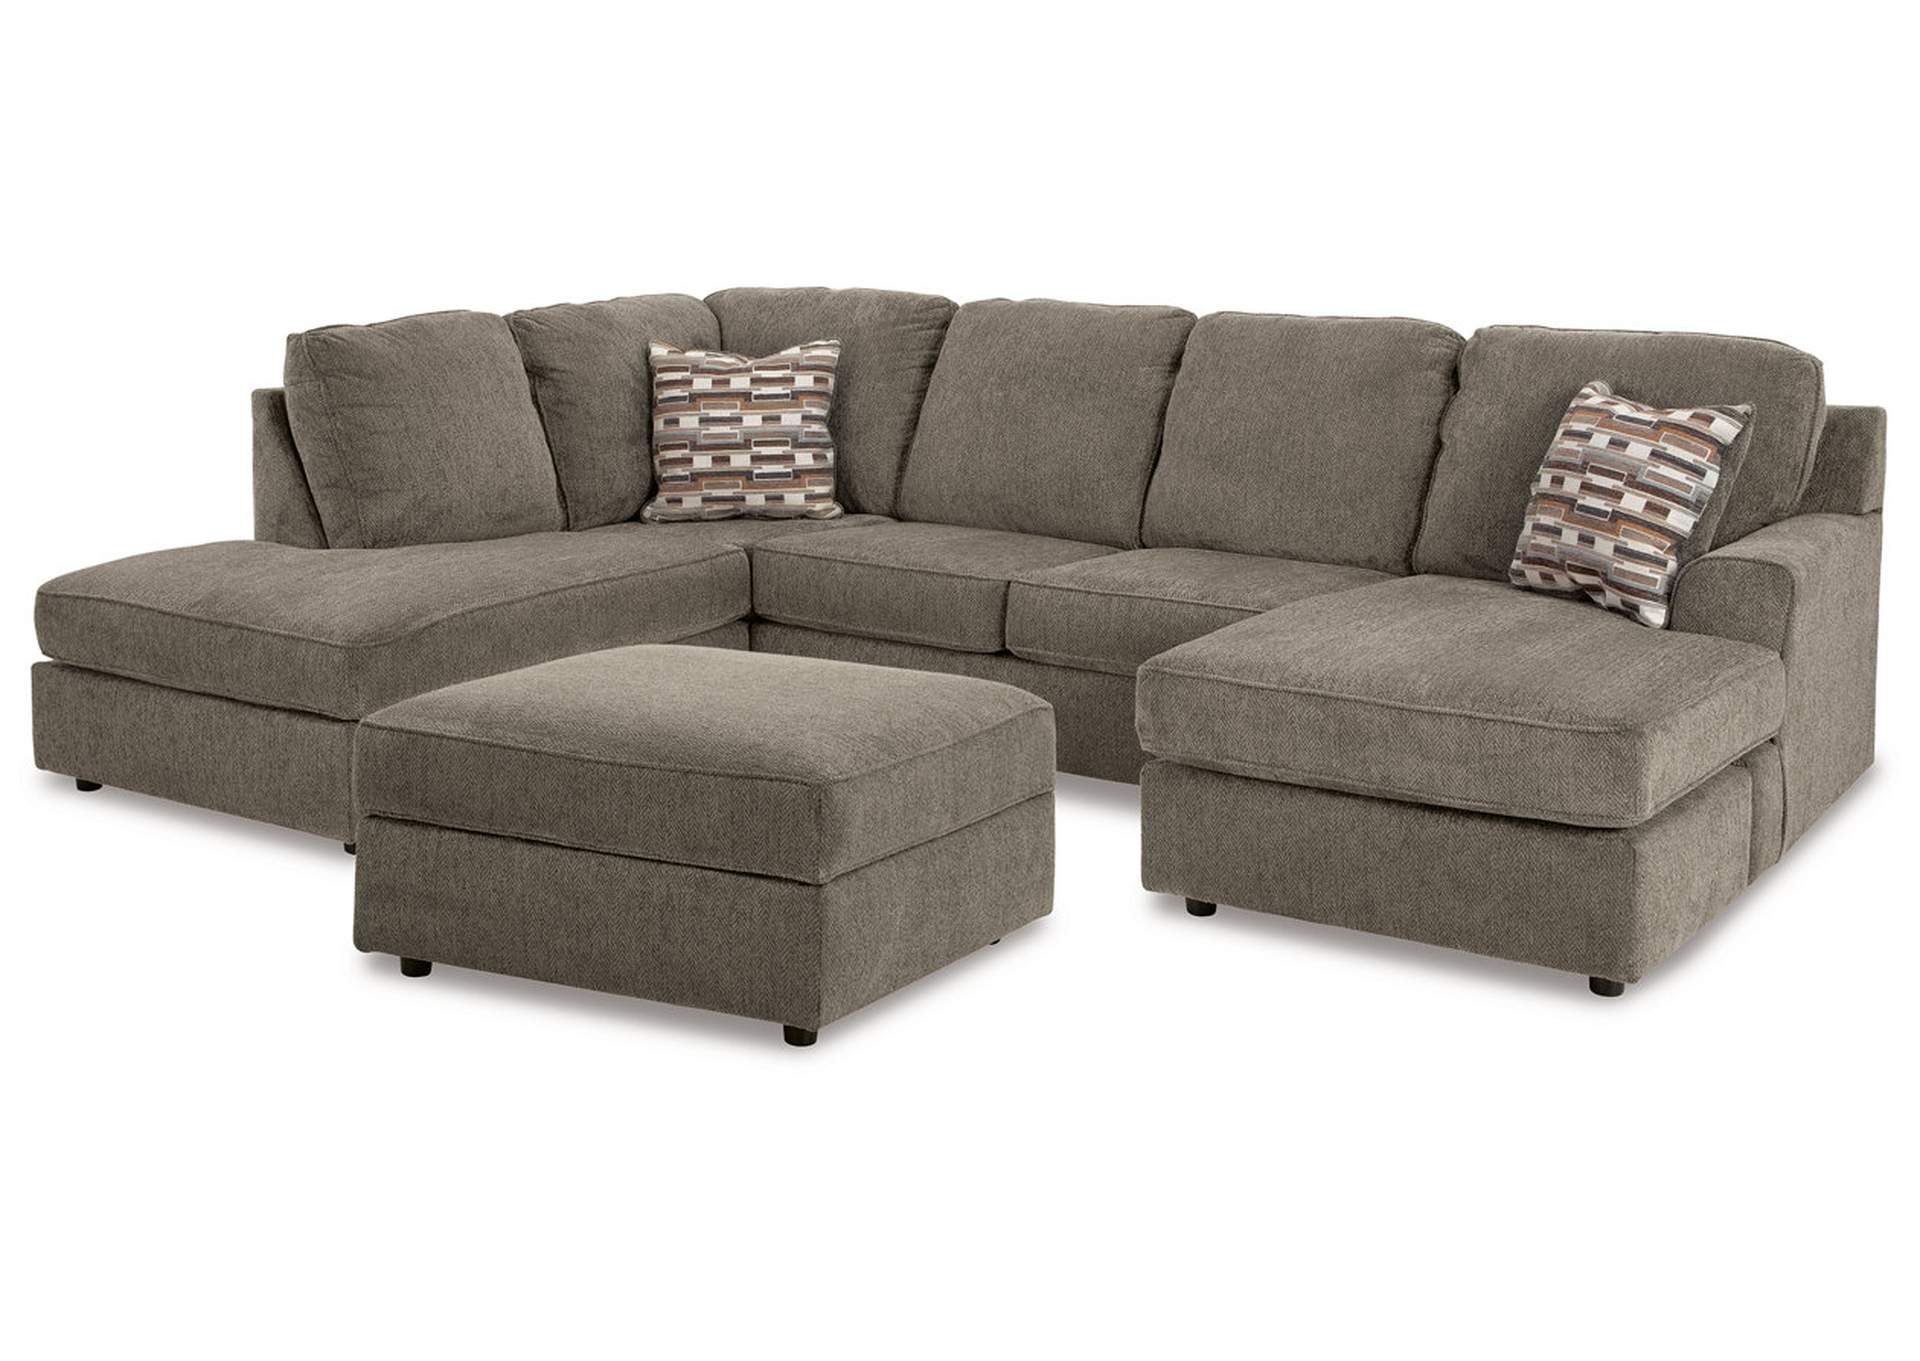 O'Phannon 2-Piece Sectional with Ottoman,Signature Design By Ashley